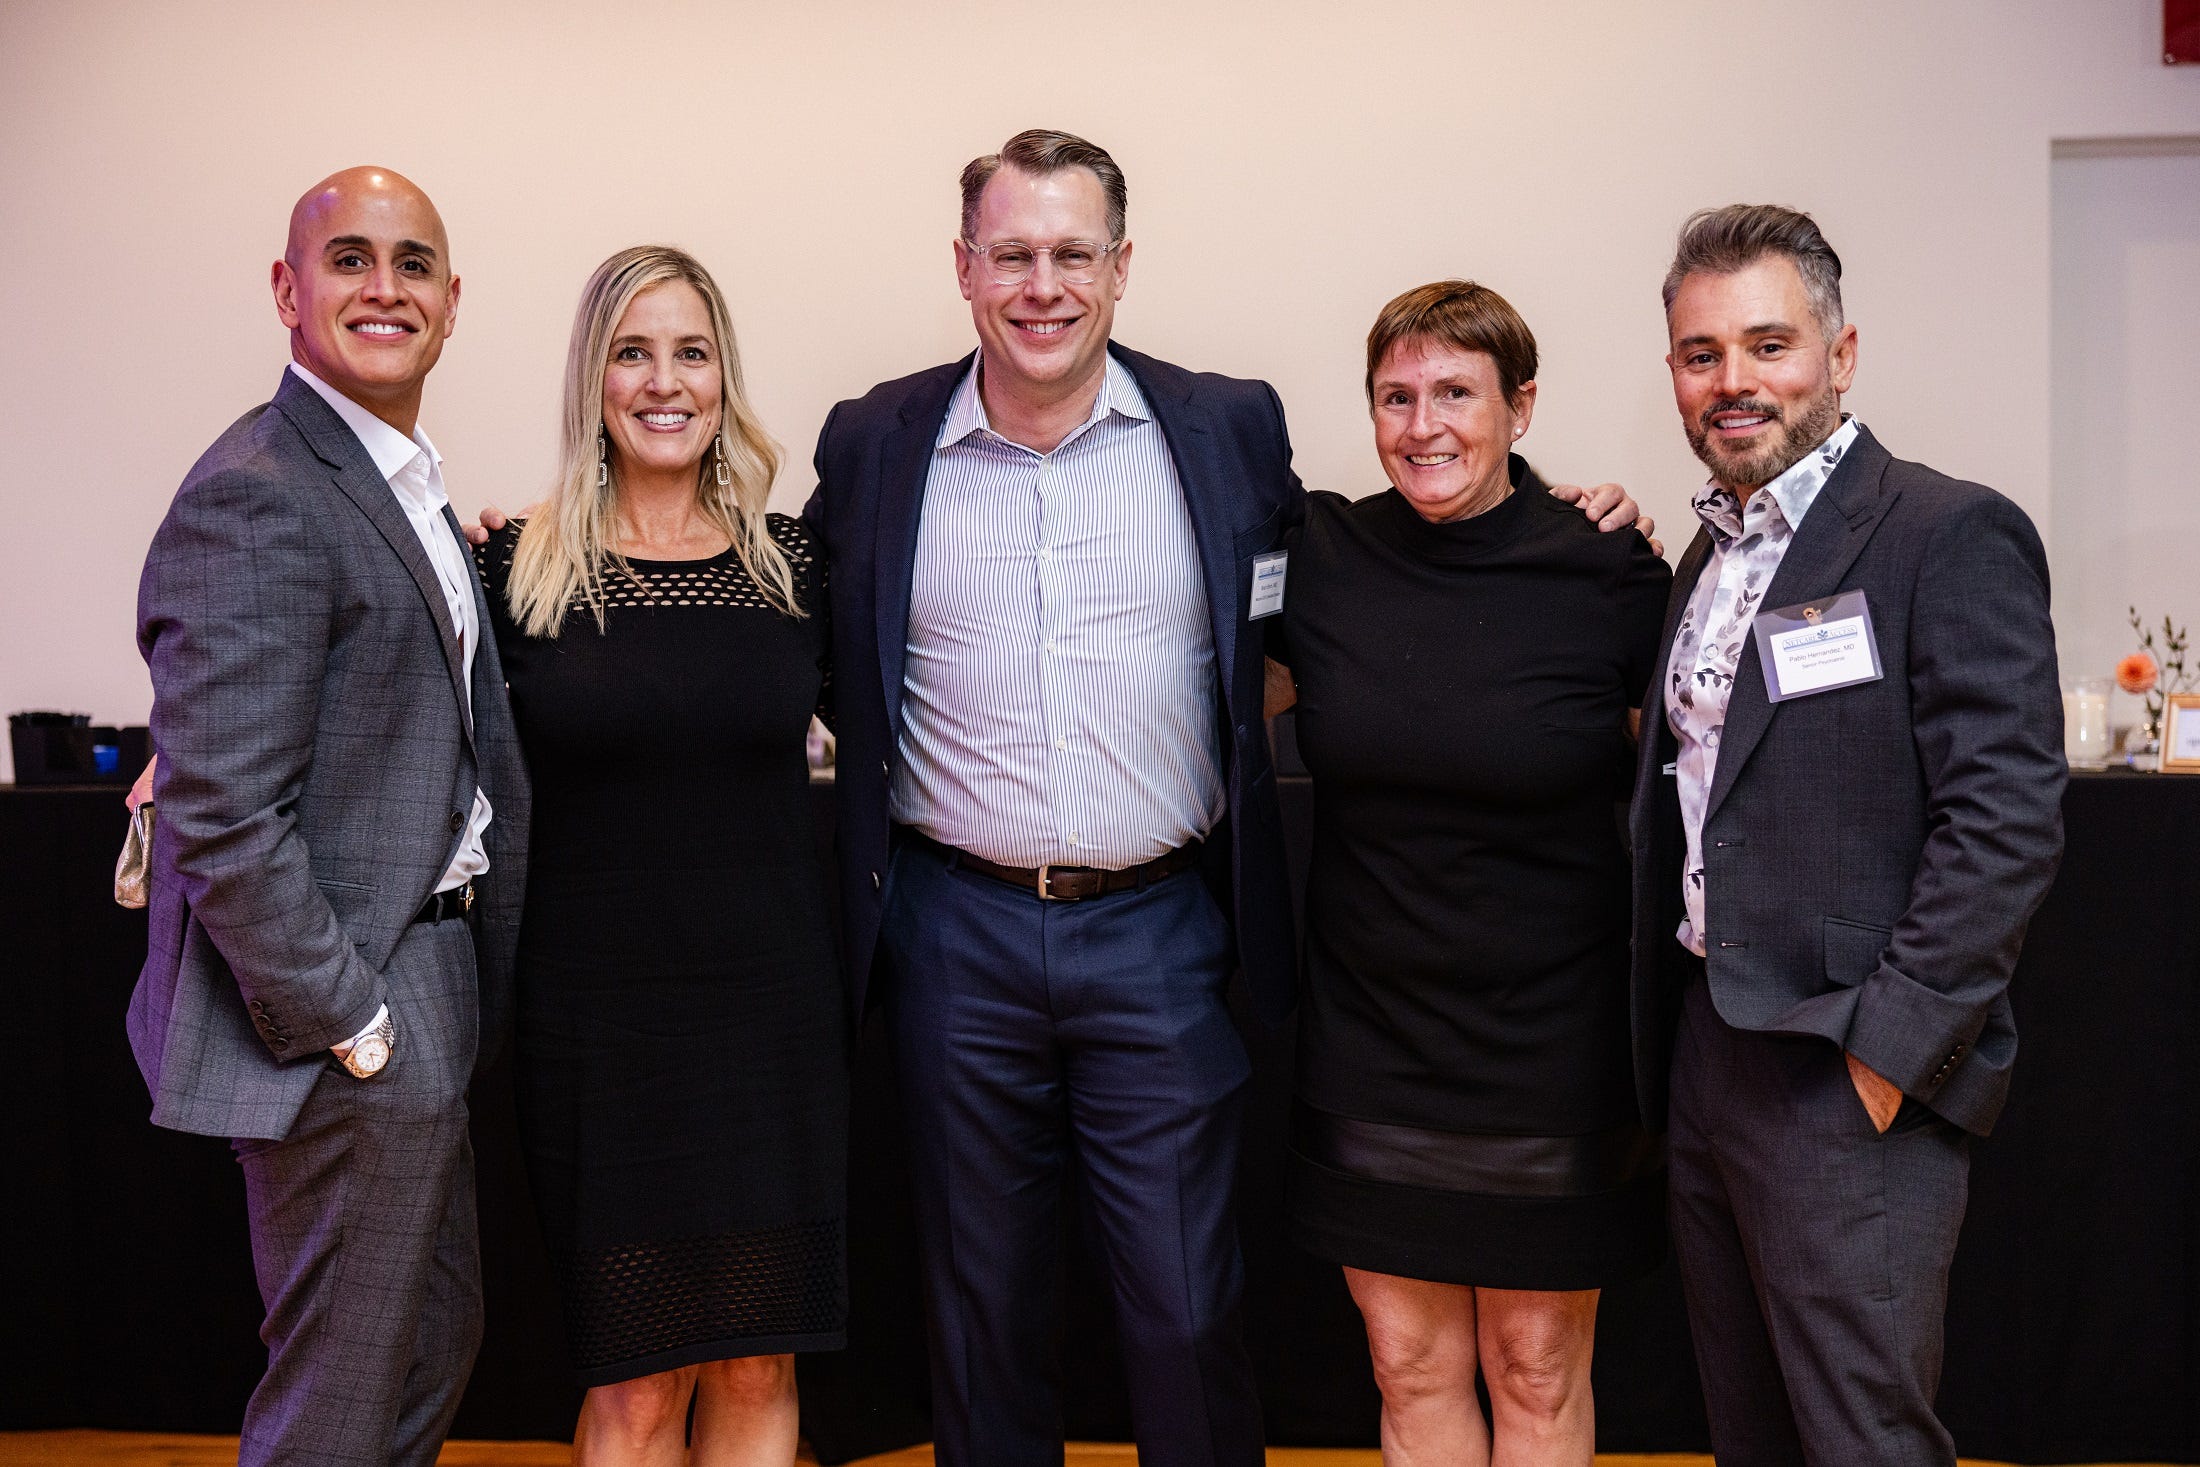 Jose Otero, Dr. Megan Schabbing, Dr. Brian Stroh, Lisa Pierce Reisz and Dr. Pablo Hernandez at the Netcare Foundation’s annual Community Awards & Recognition Dinner, held Oct. 18, 2023, at the Columbus Museum of Art